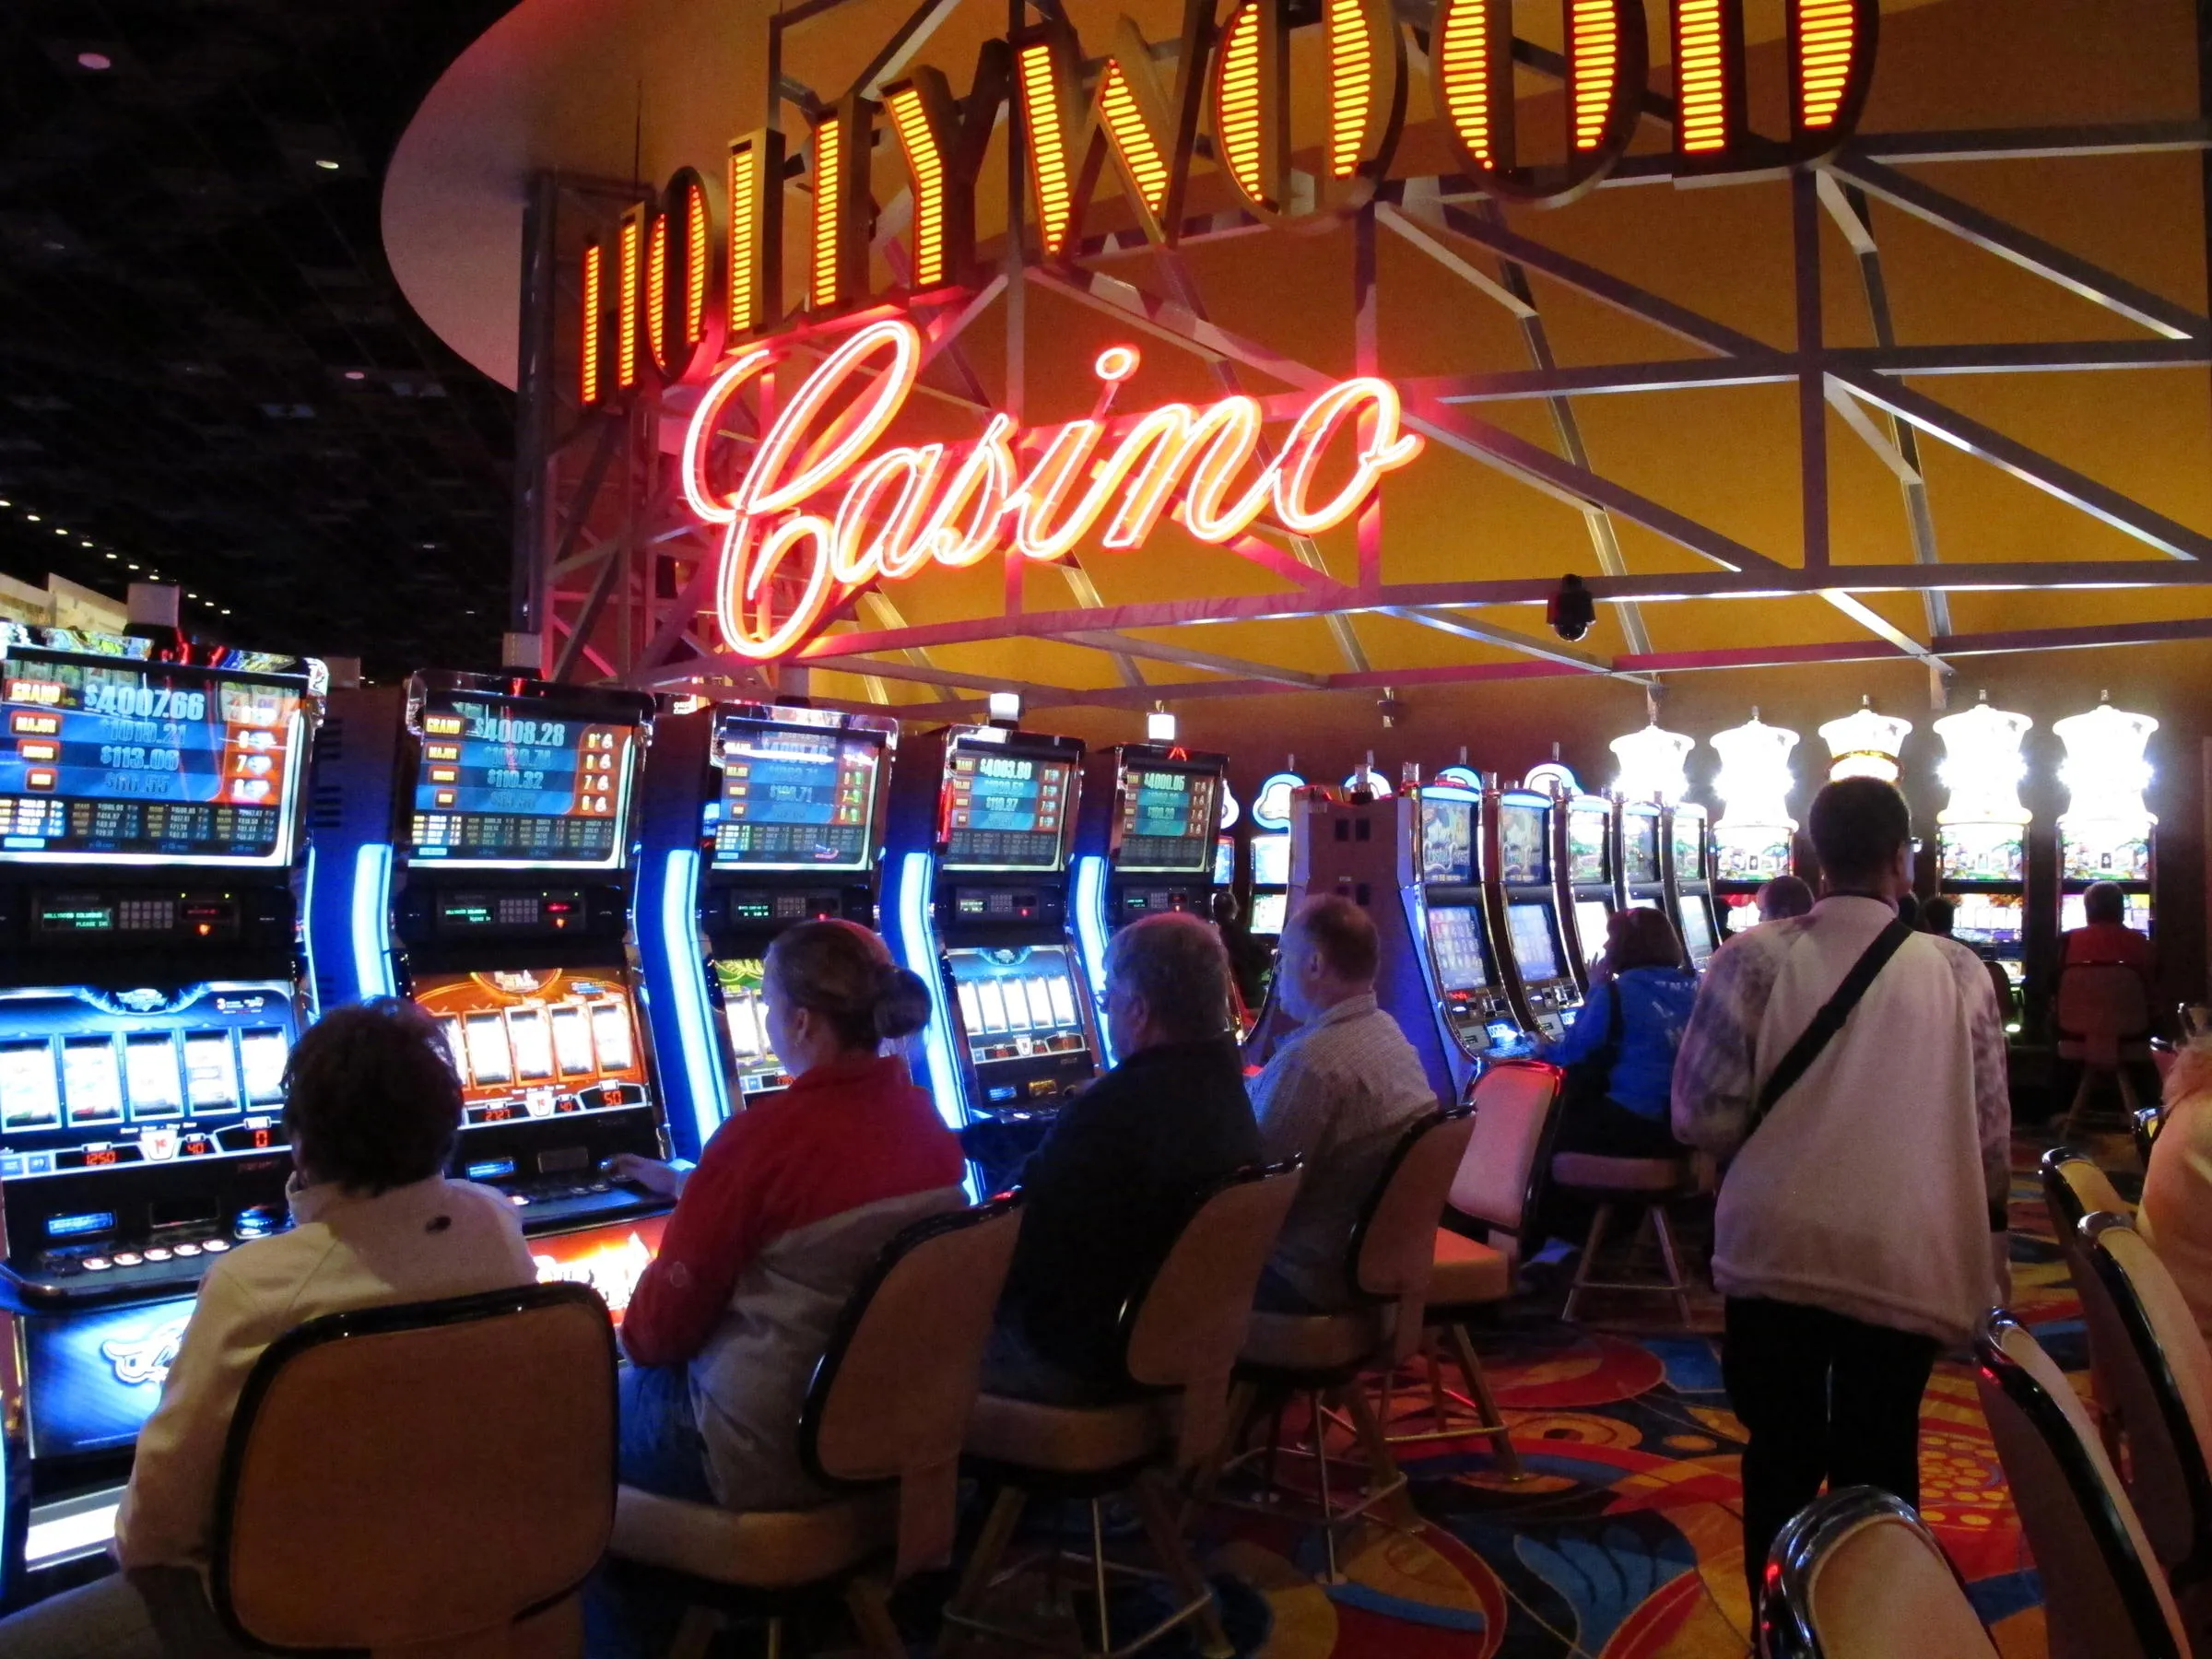 Casinos must conduct know-your-customer activities